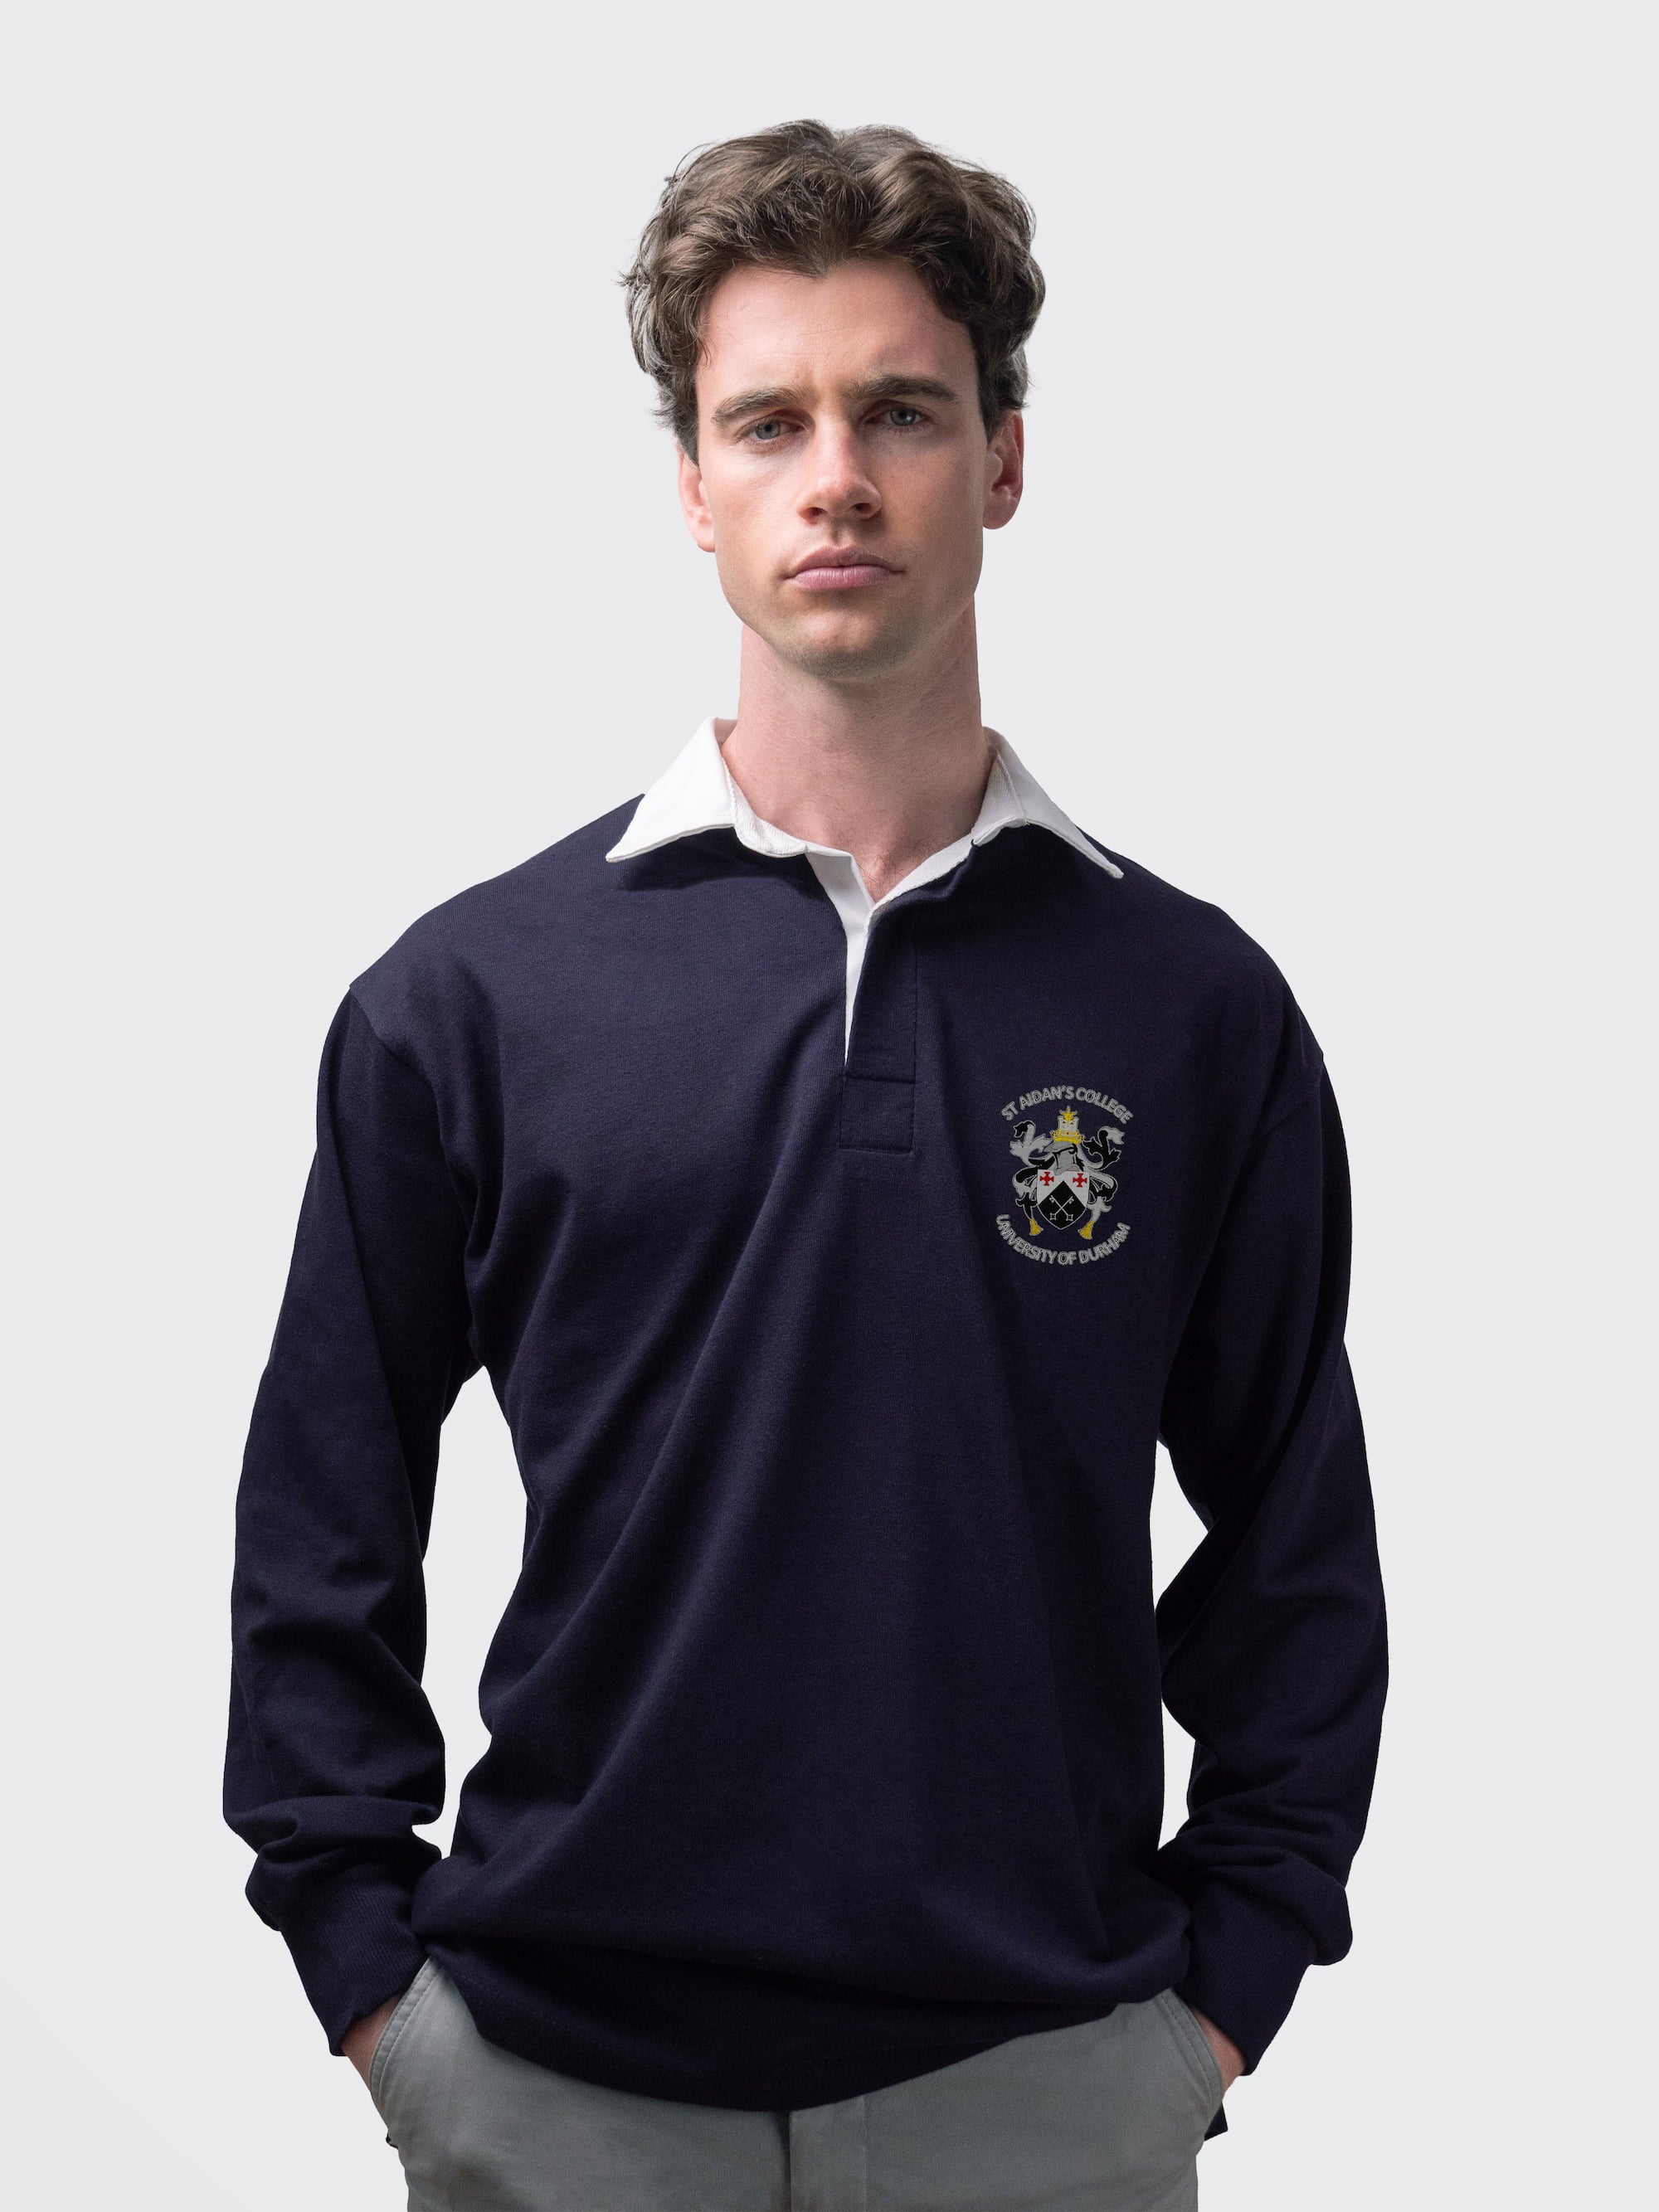 St Aidan's student wearing an embroidered mens rugby shirt in navy